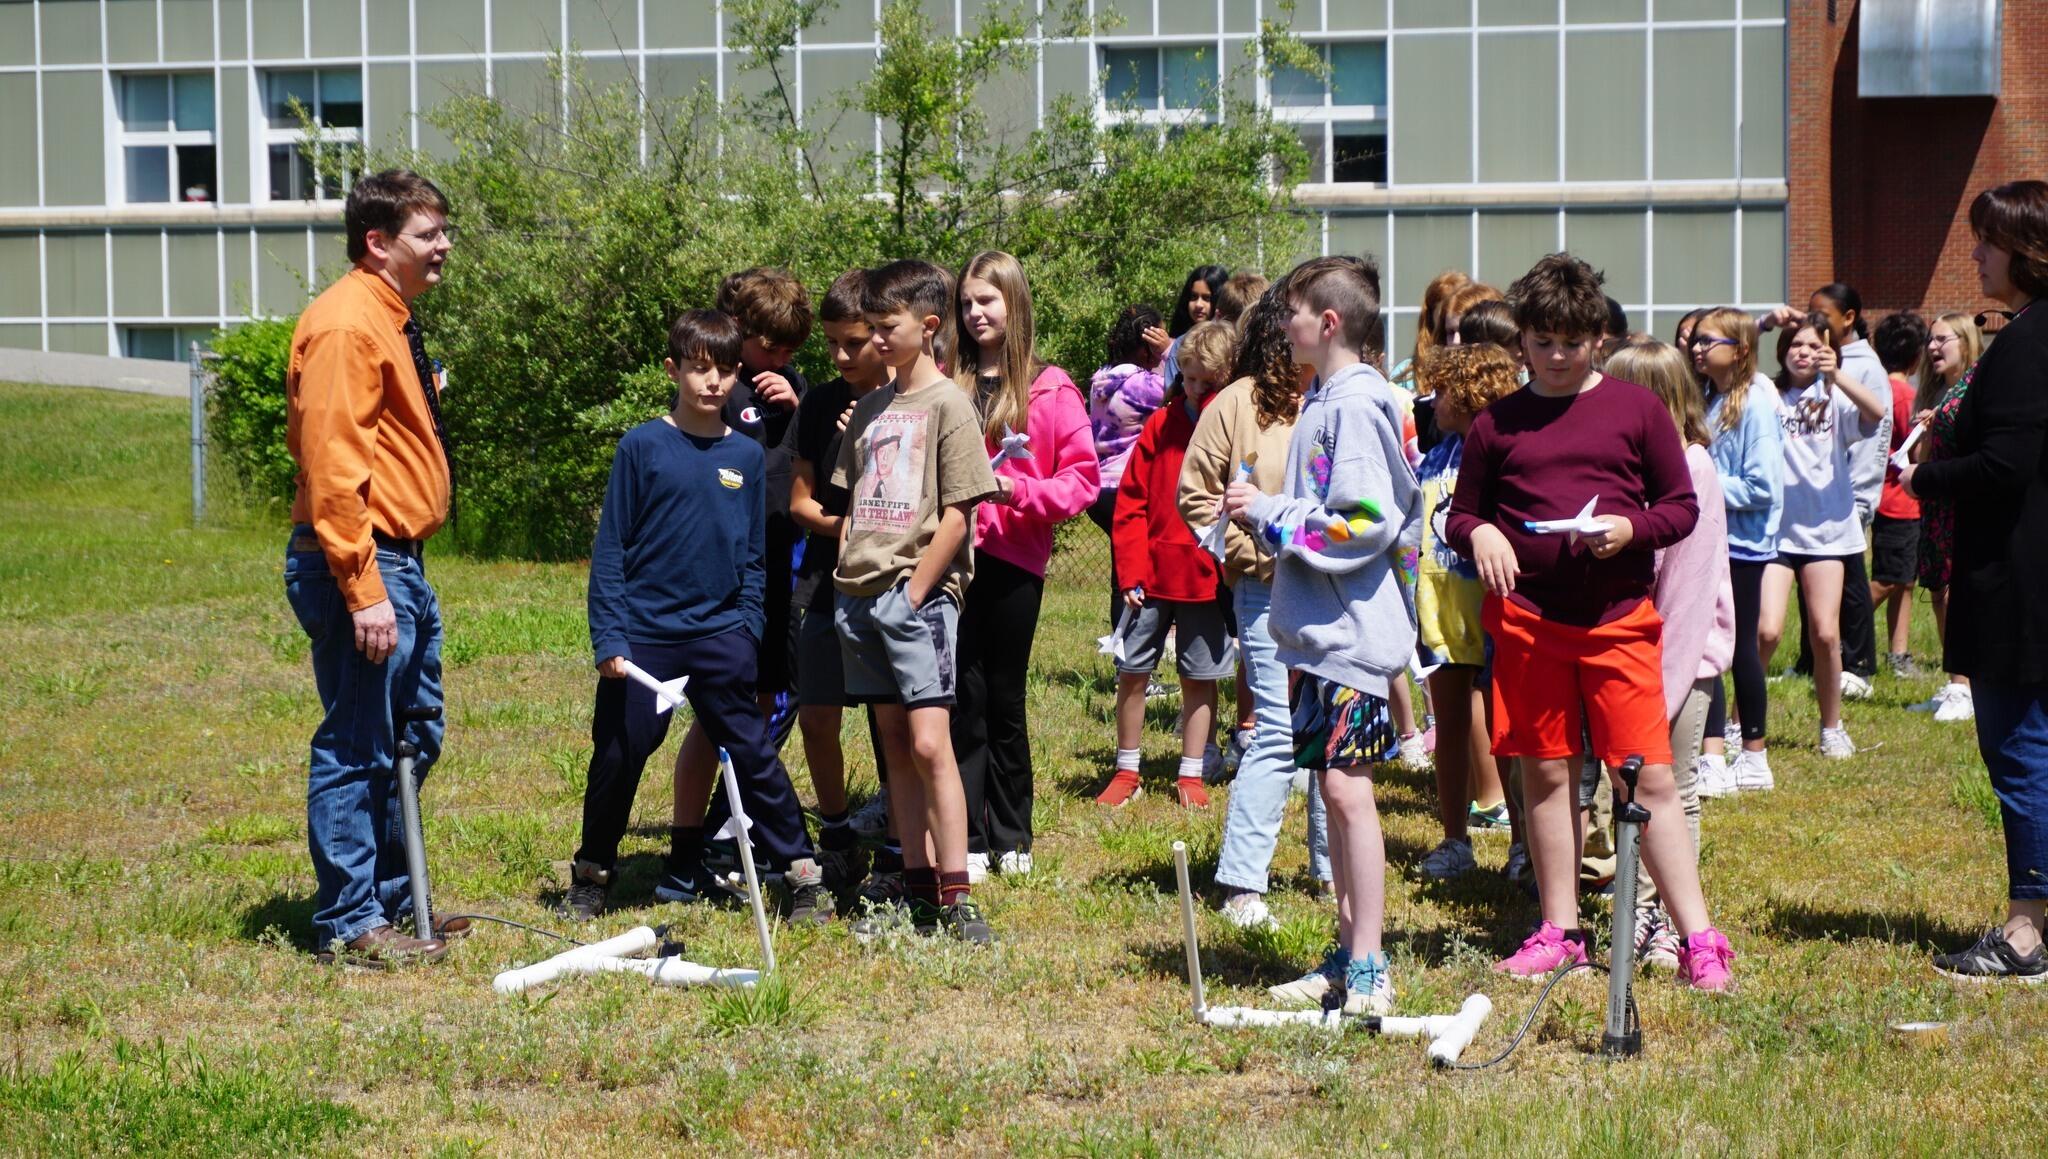 Students outside school building launching rockets